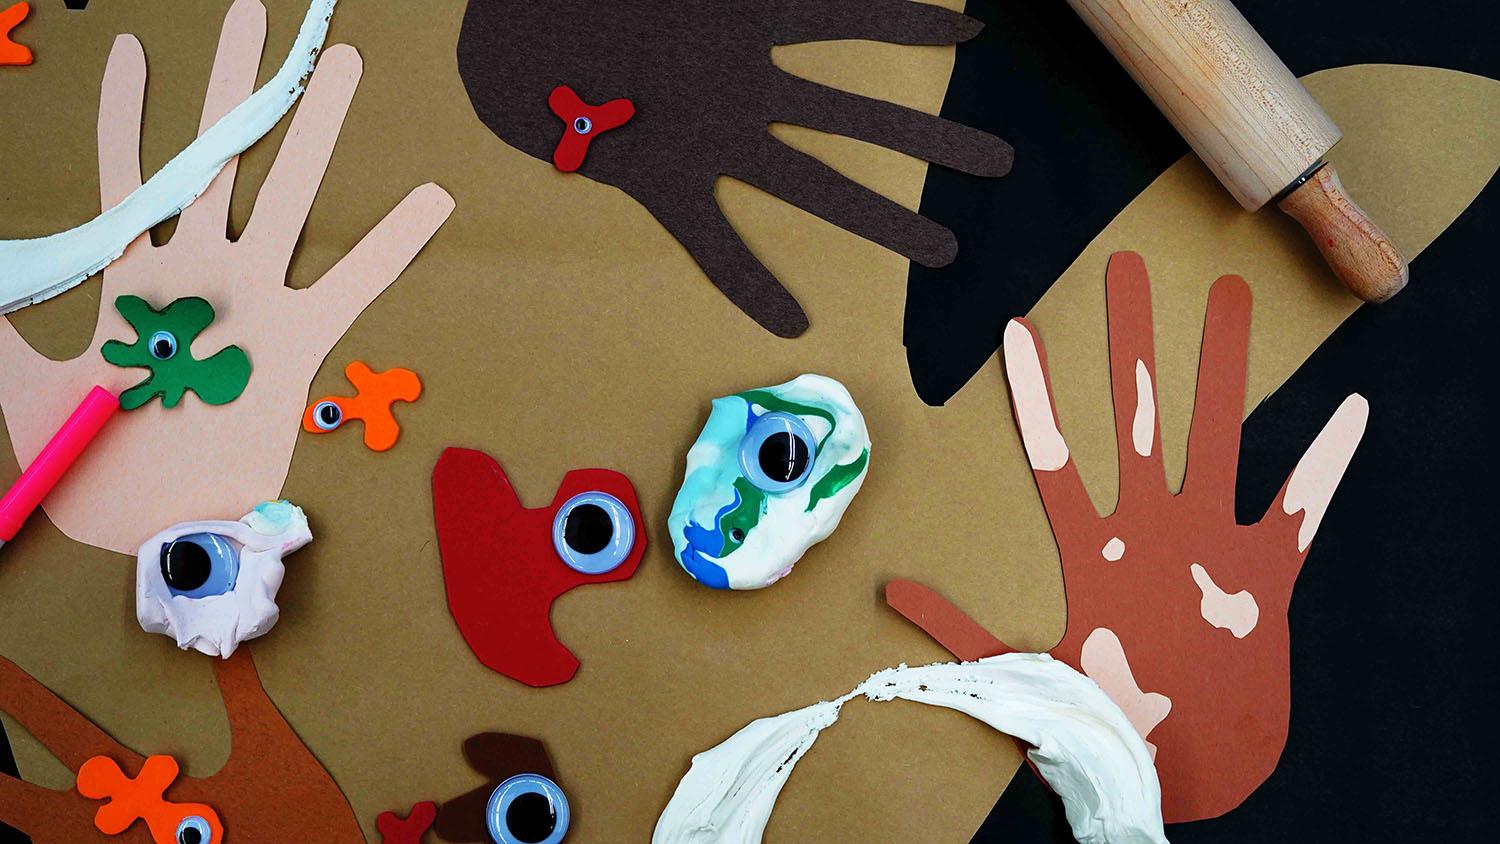 Construction paper hands and 'germs' made of clay, paper, and googly eyes